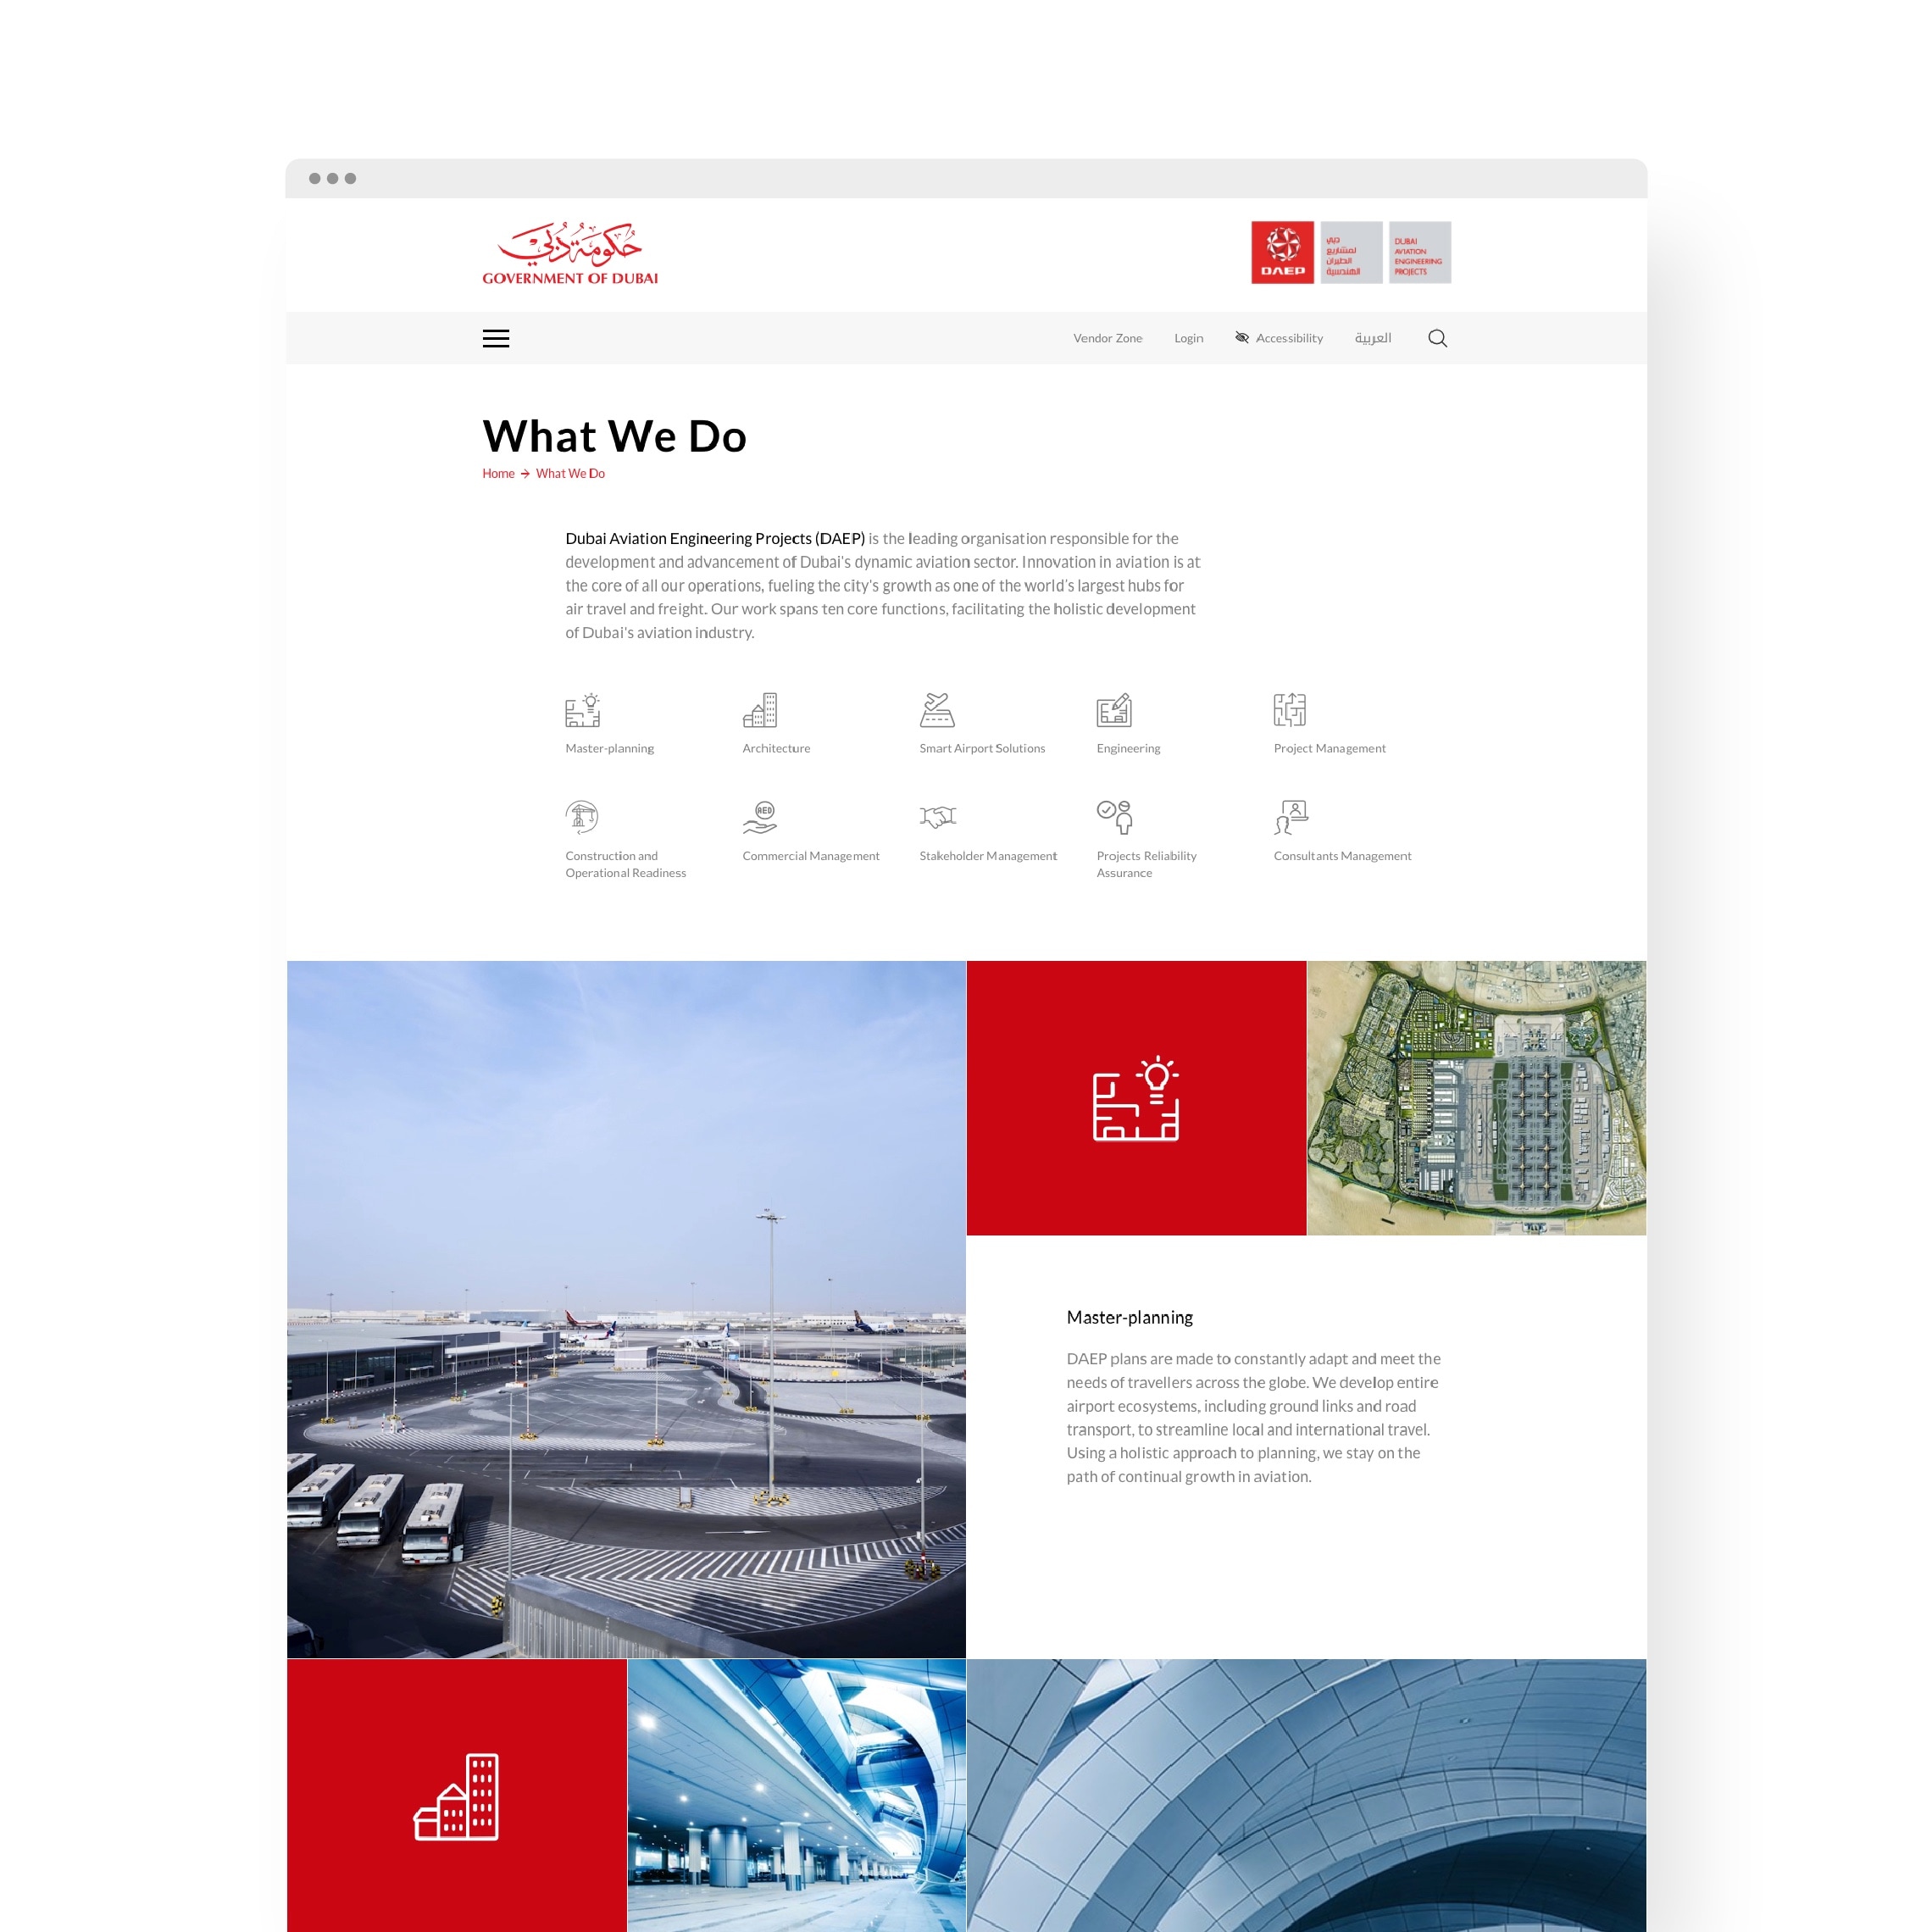 View of the "what we do" page of the website. The new content and design bring the average interaction time on each page to 2 minutes.